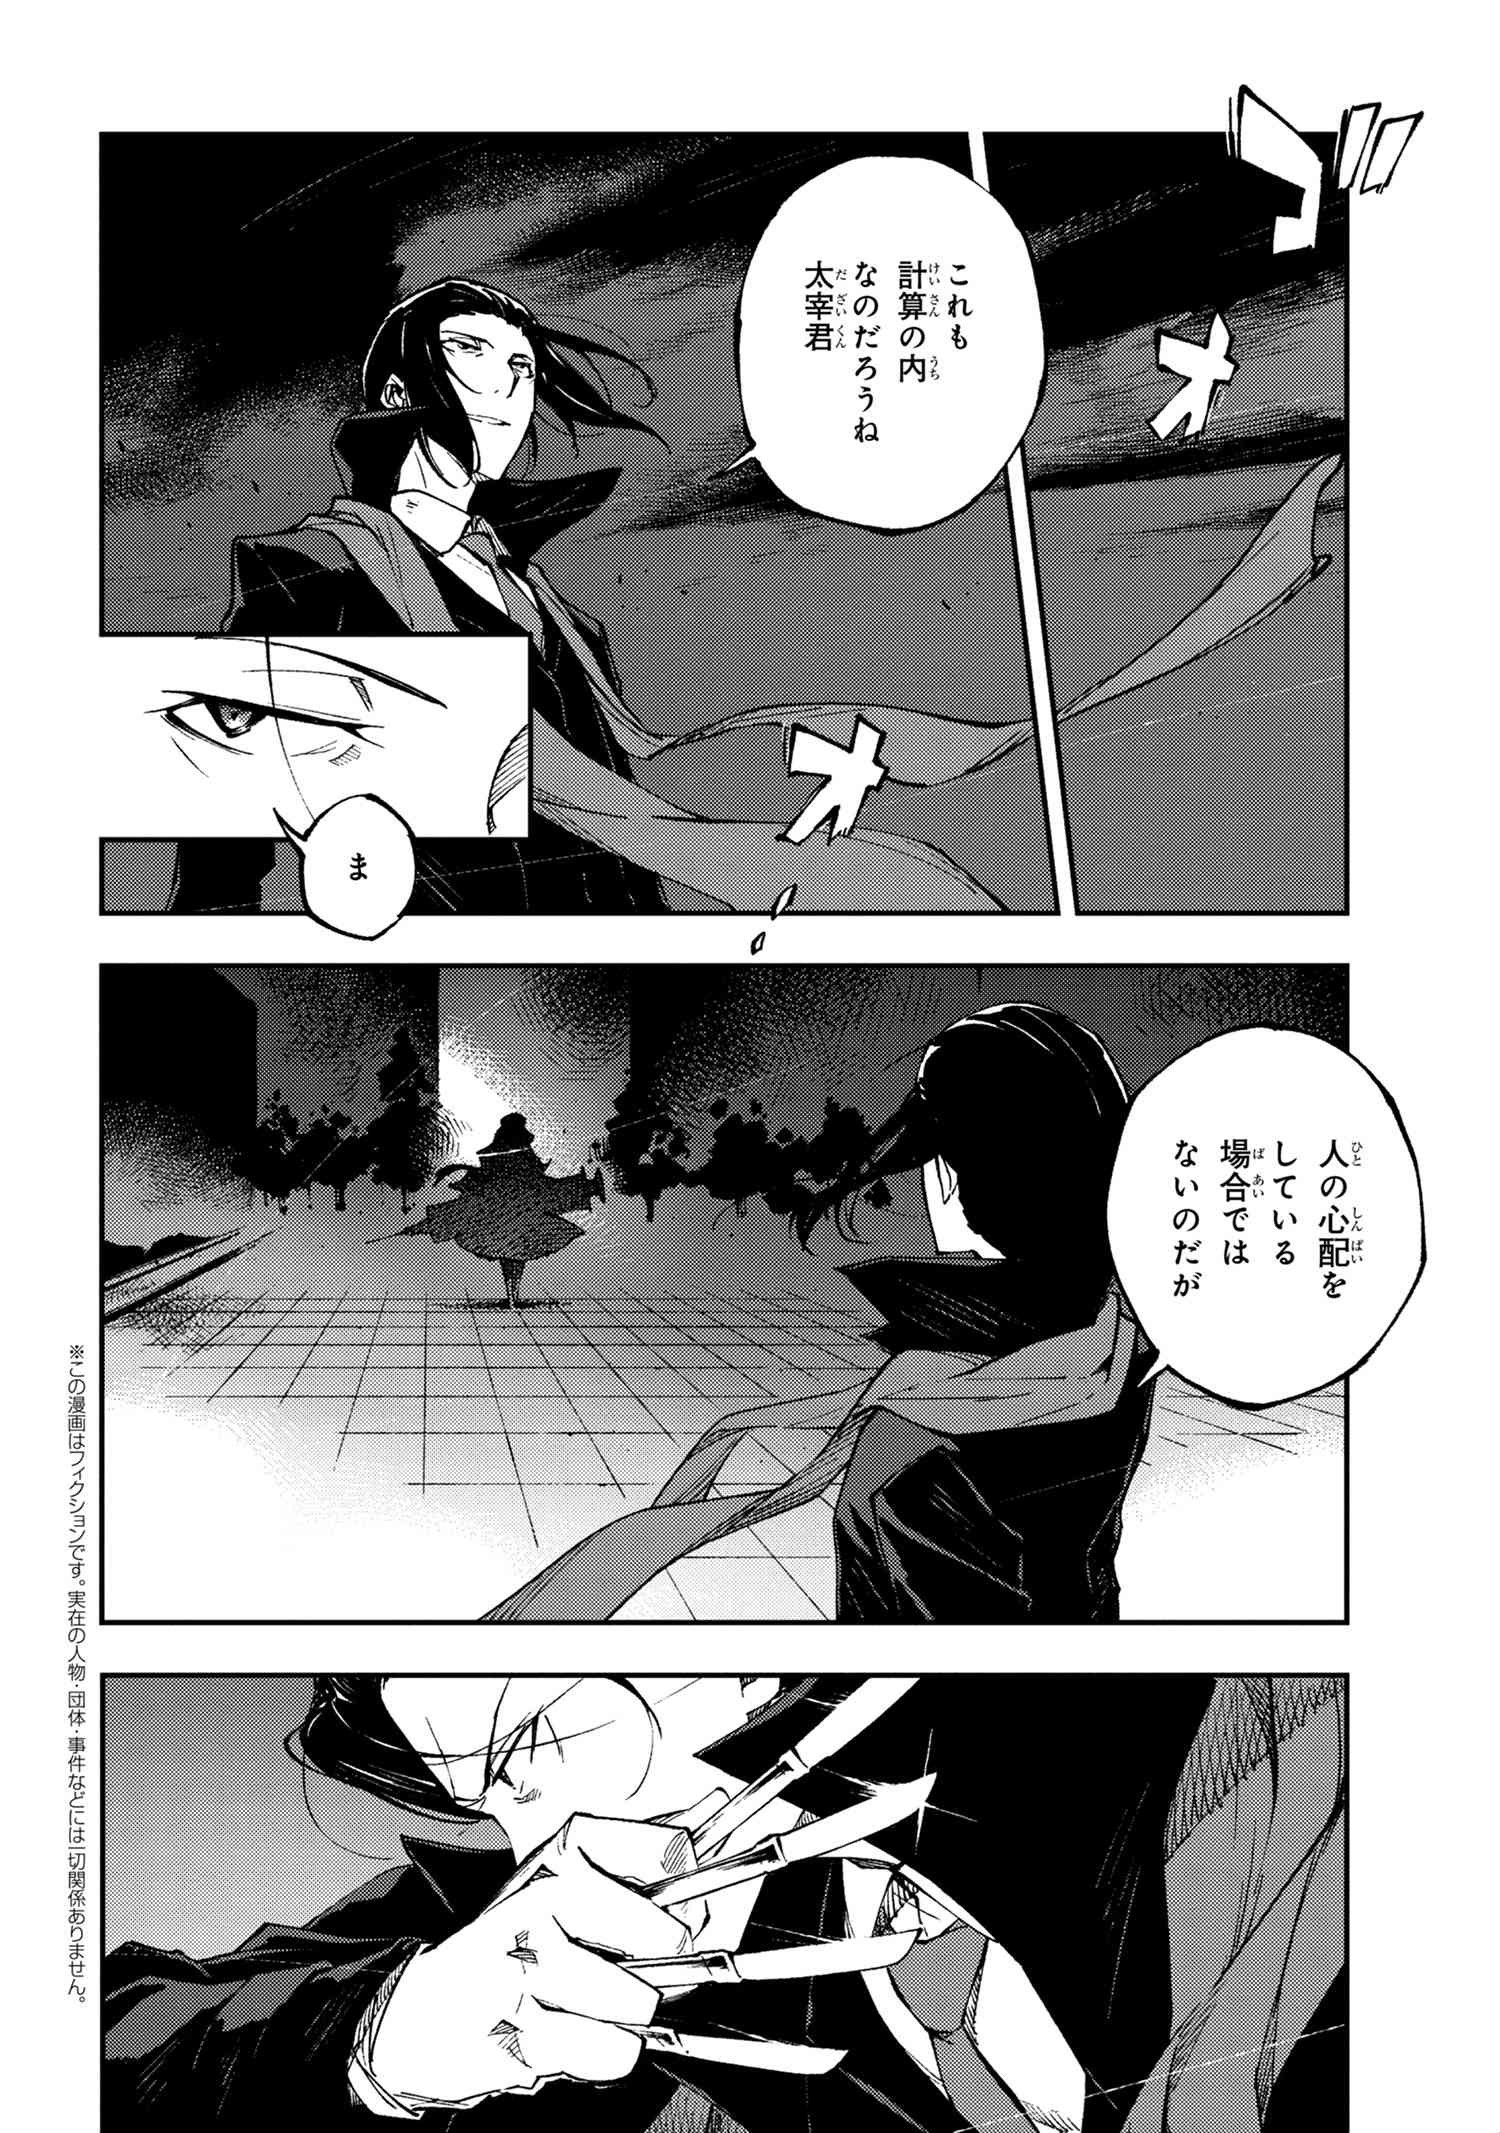 Bungou Stray Dogs: Dead Apple - Chapter 14-3 - Page 1